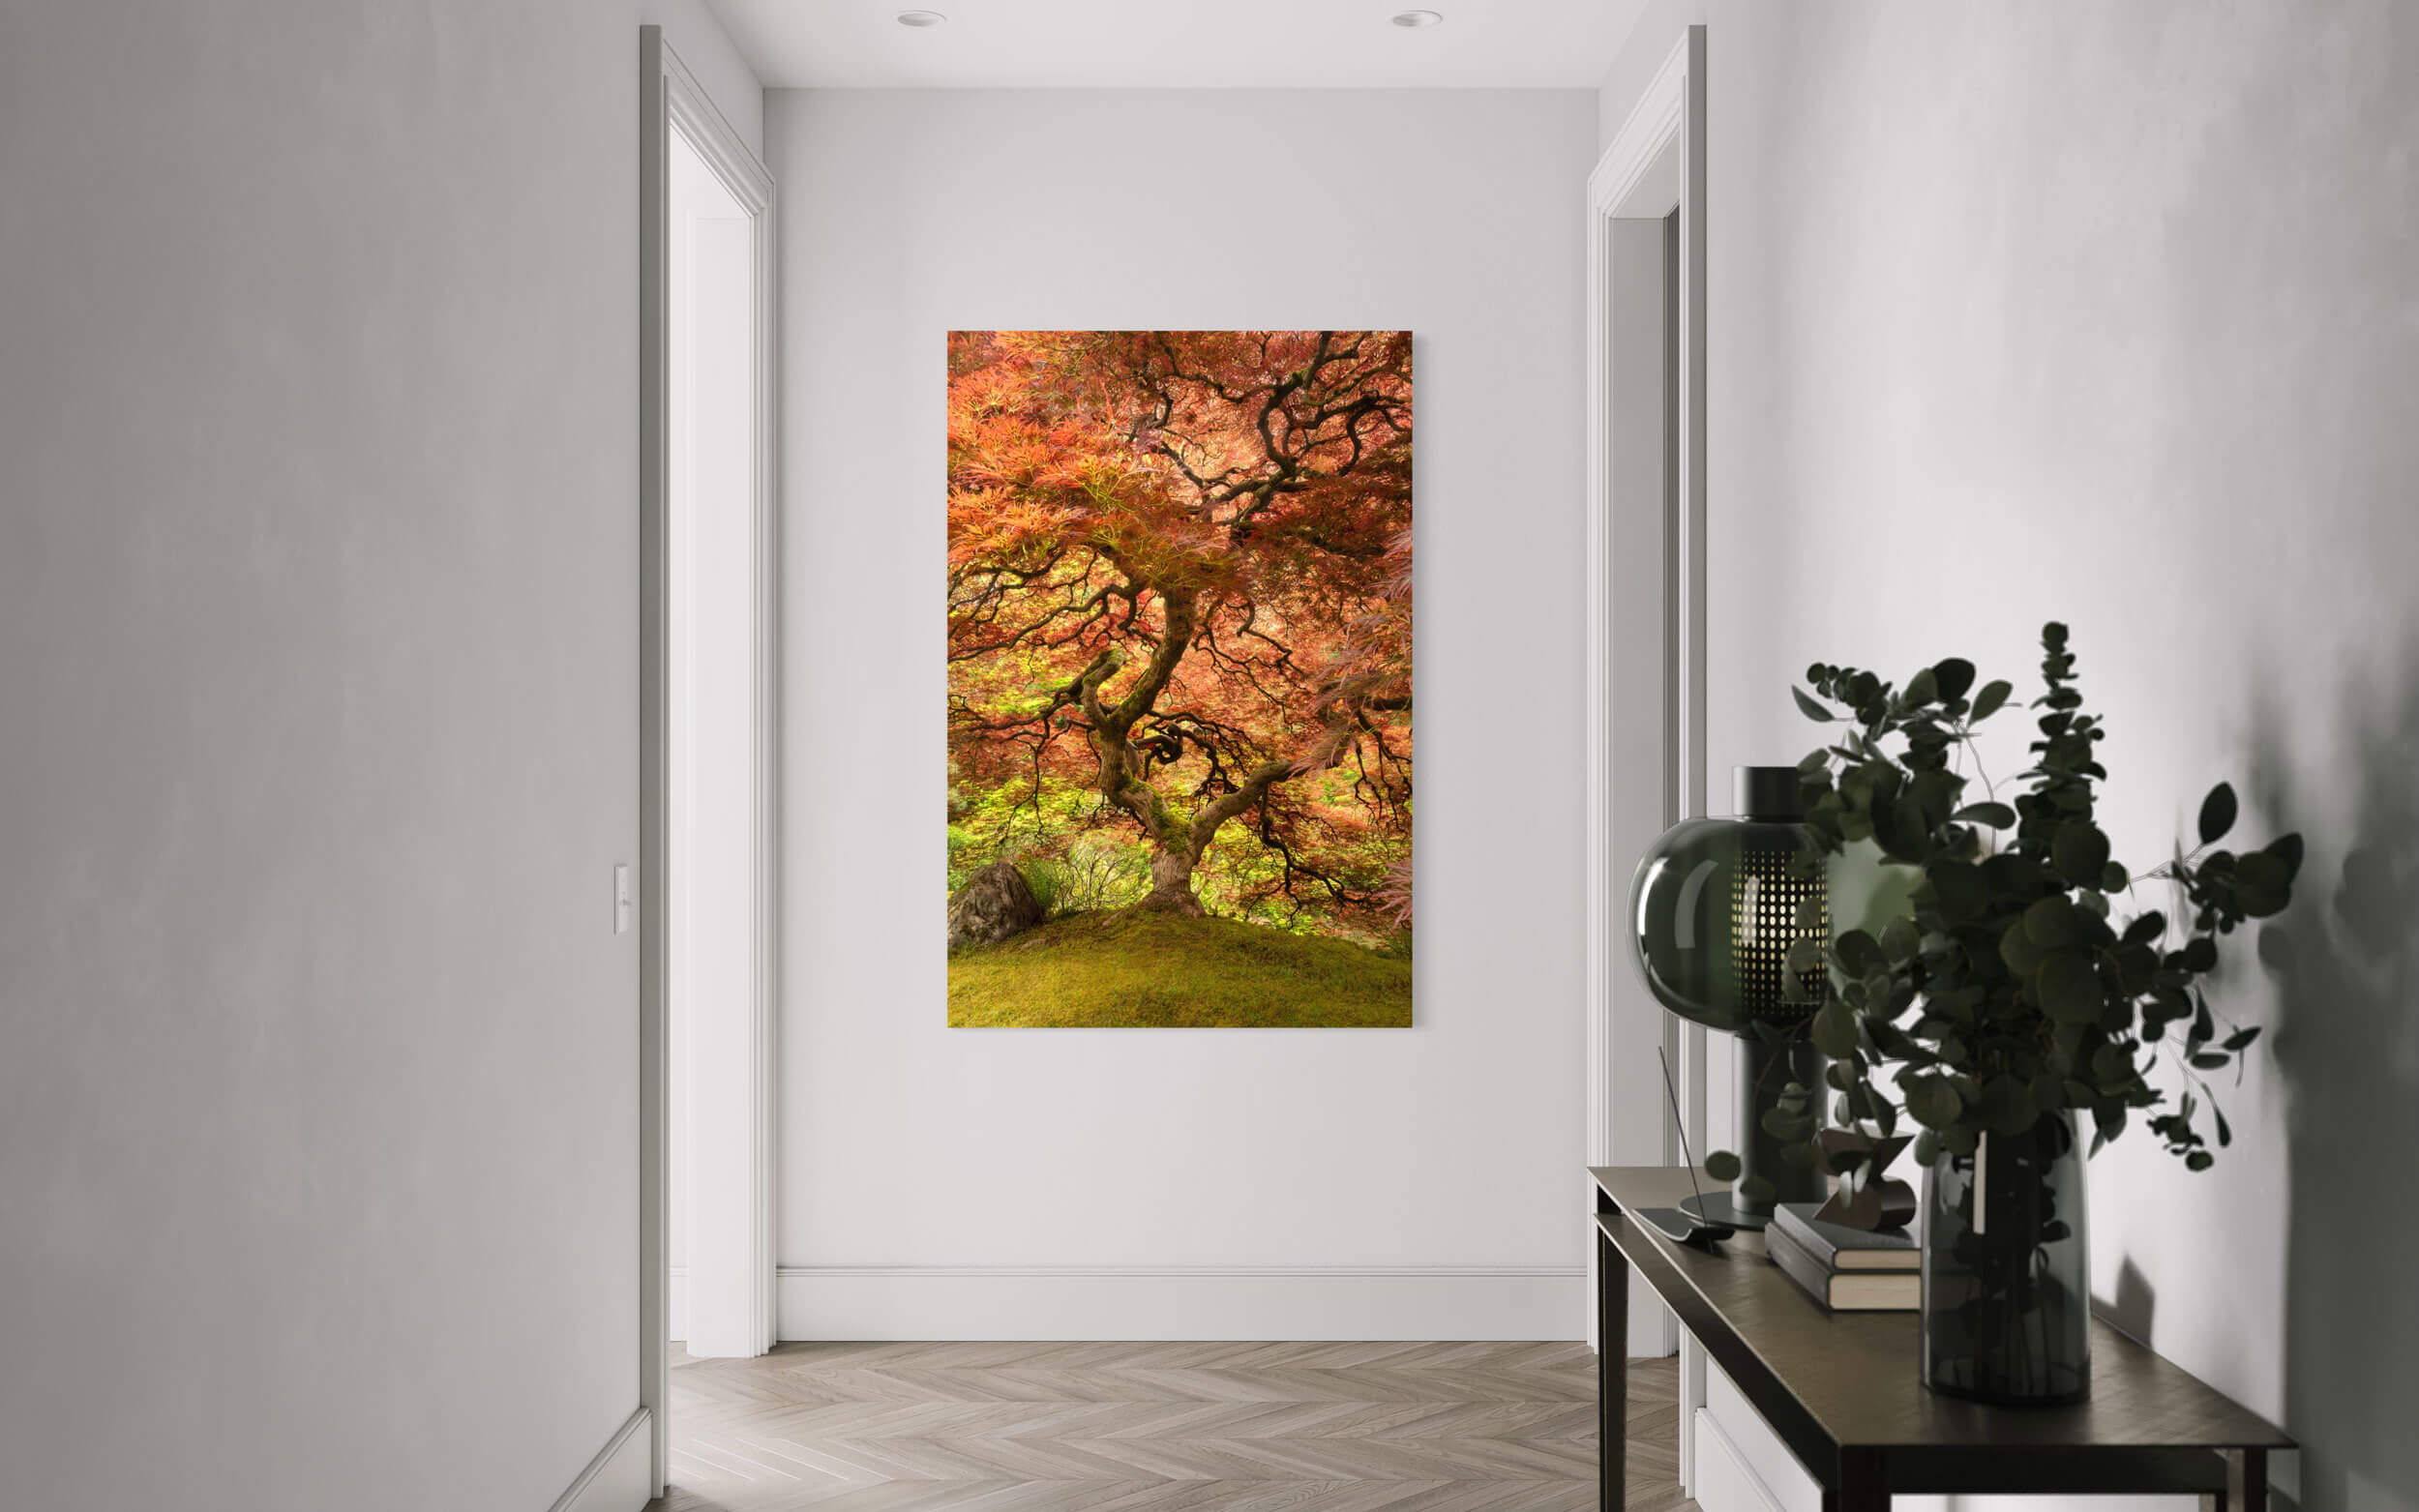 A piece of Japanese Garden art showing a maple tree hangs in a hallway.